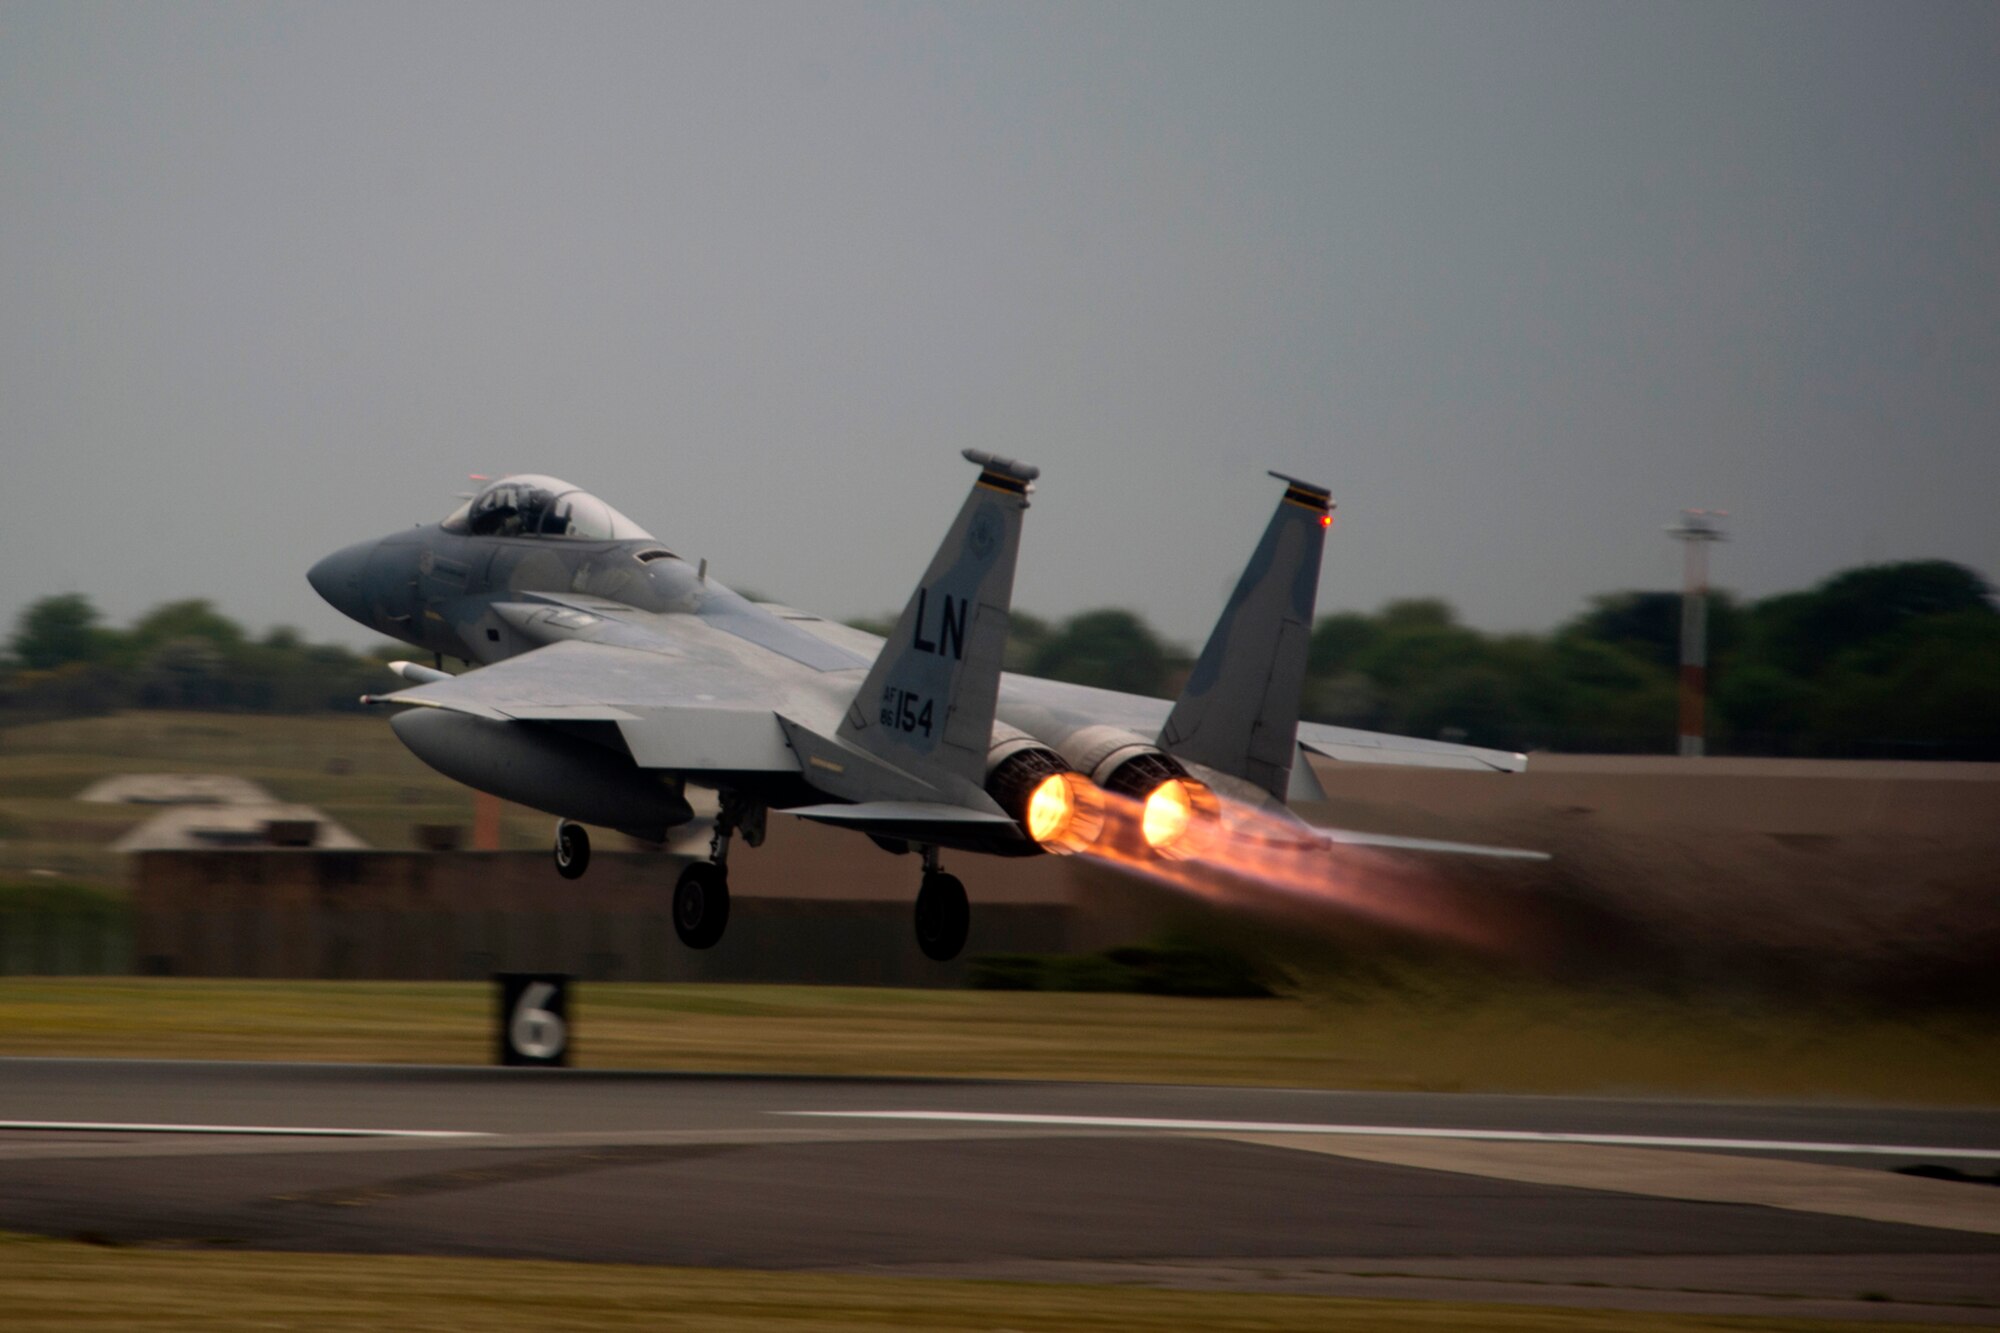 An F-15C Eagle assigned to the 493rd Fighter Squadron takes off at RAF Lakenheath, May 15, 2017. The U.S. is scheduled to deploy F-15C Eagles, Airmen and associated equipment from the 48th Fighter Wing to support the next NATO Baltic Air Policing rotation at Šiauliai Air Base, Lithuania. (U.S. Air Force photo/Master Sgt. Eric Burks)